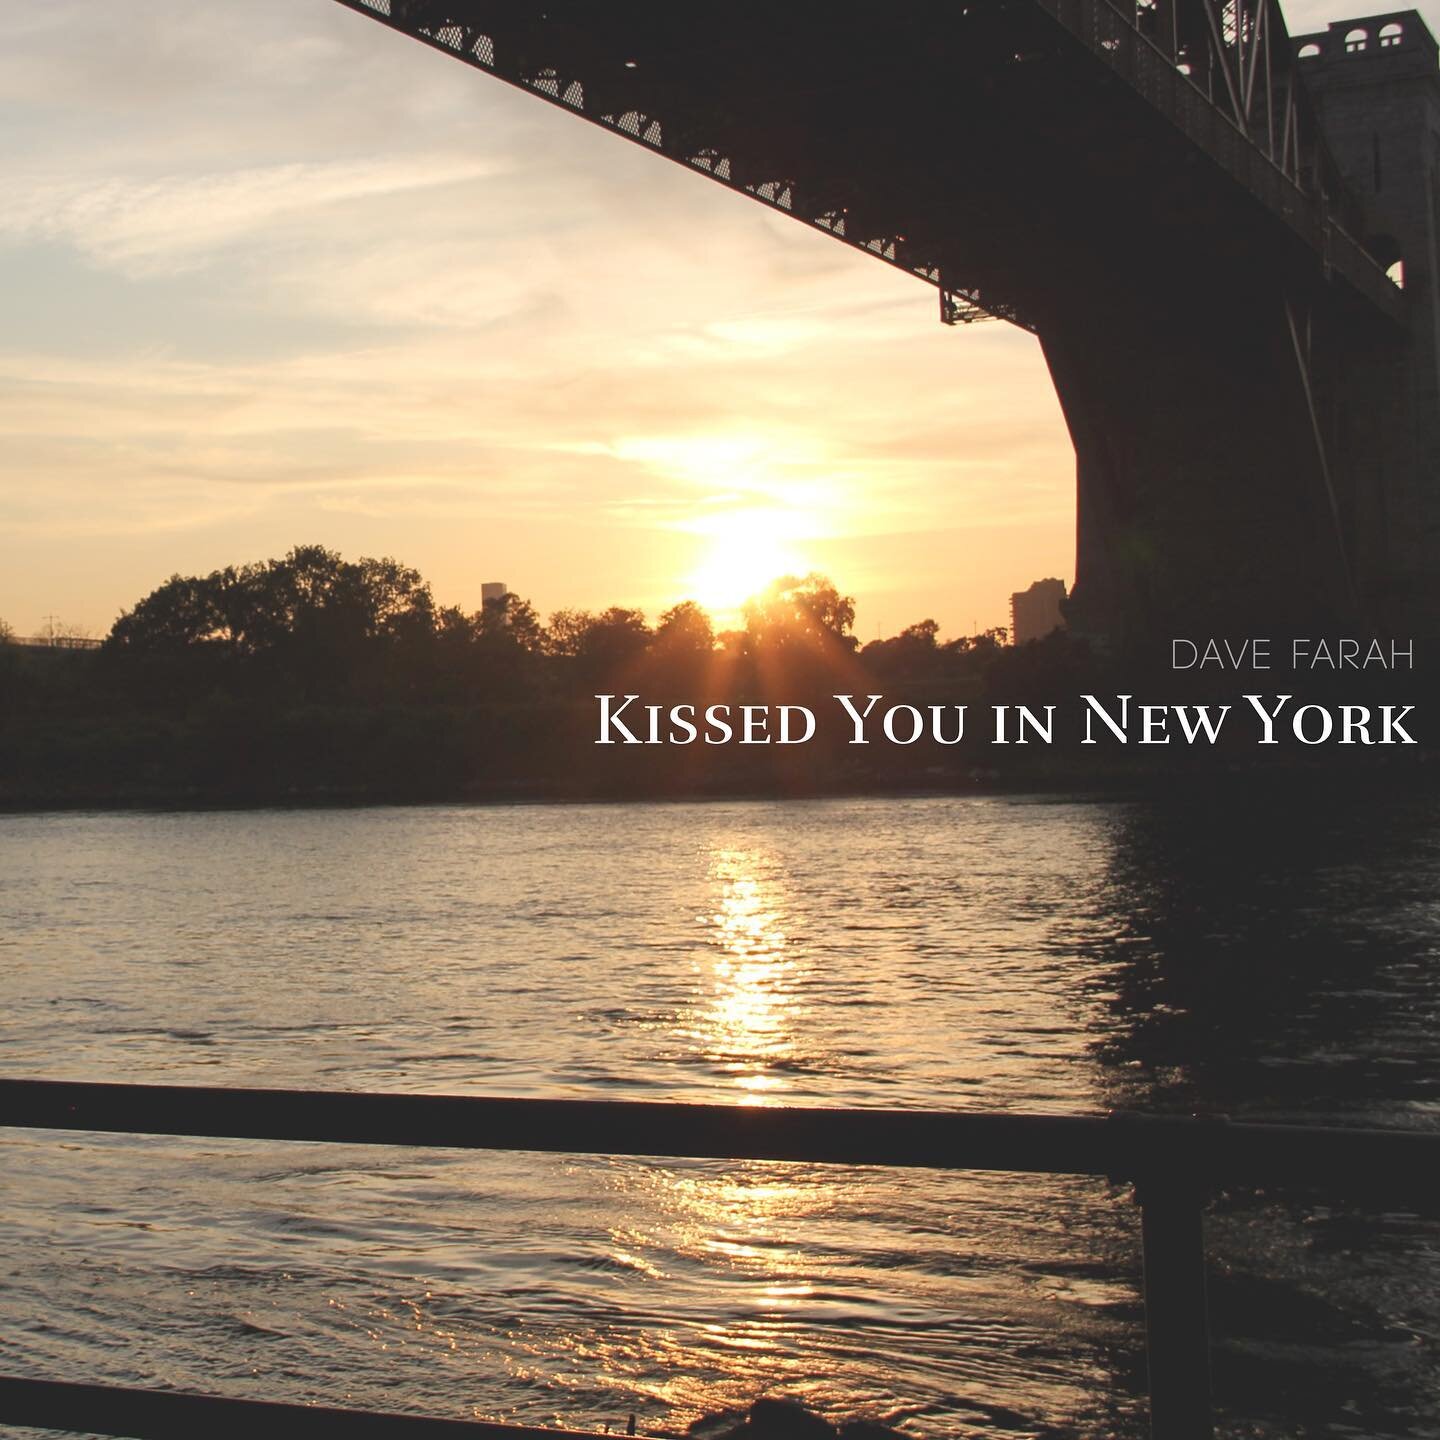 &lsquo;Kissed You in New York&rsquo; is now available everywhere. 🙌

I had a blast writing and recording this song. It&rsquo;s a true story about nostalgia and second chances, and hopefully it makes you want to sing along. If you like it, please sha